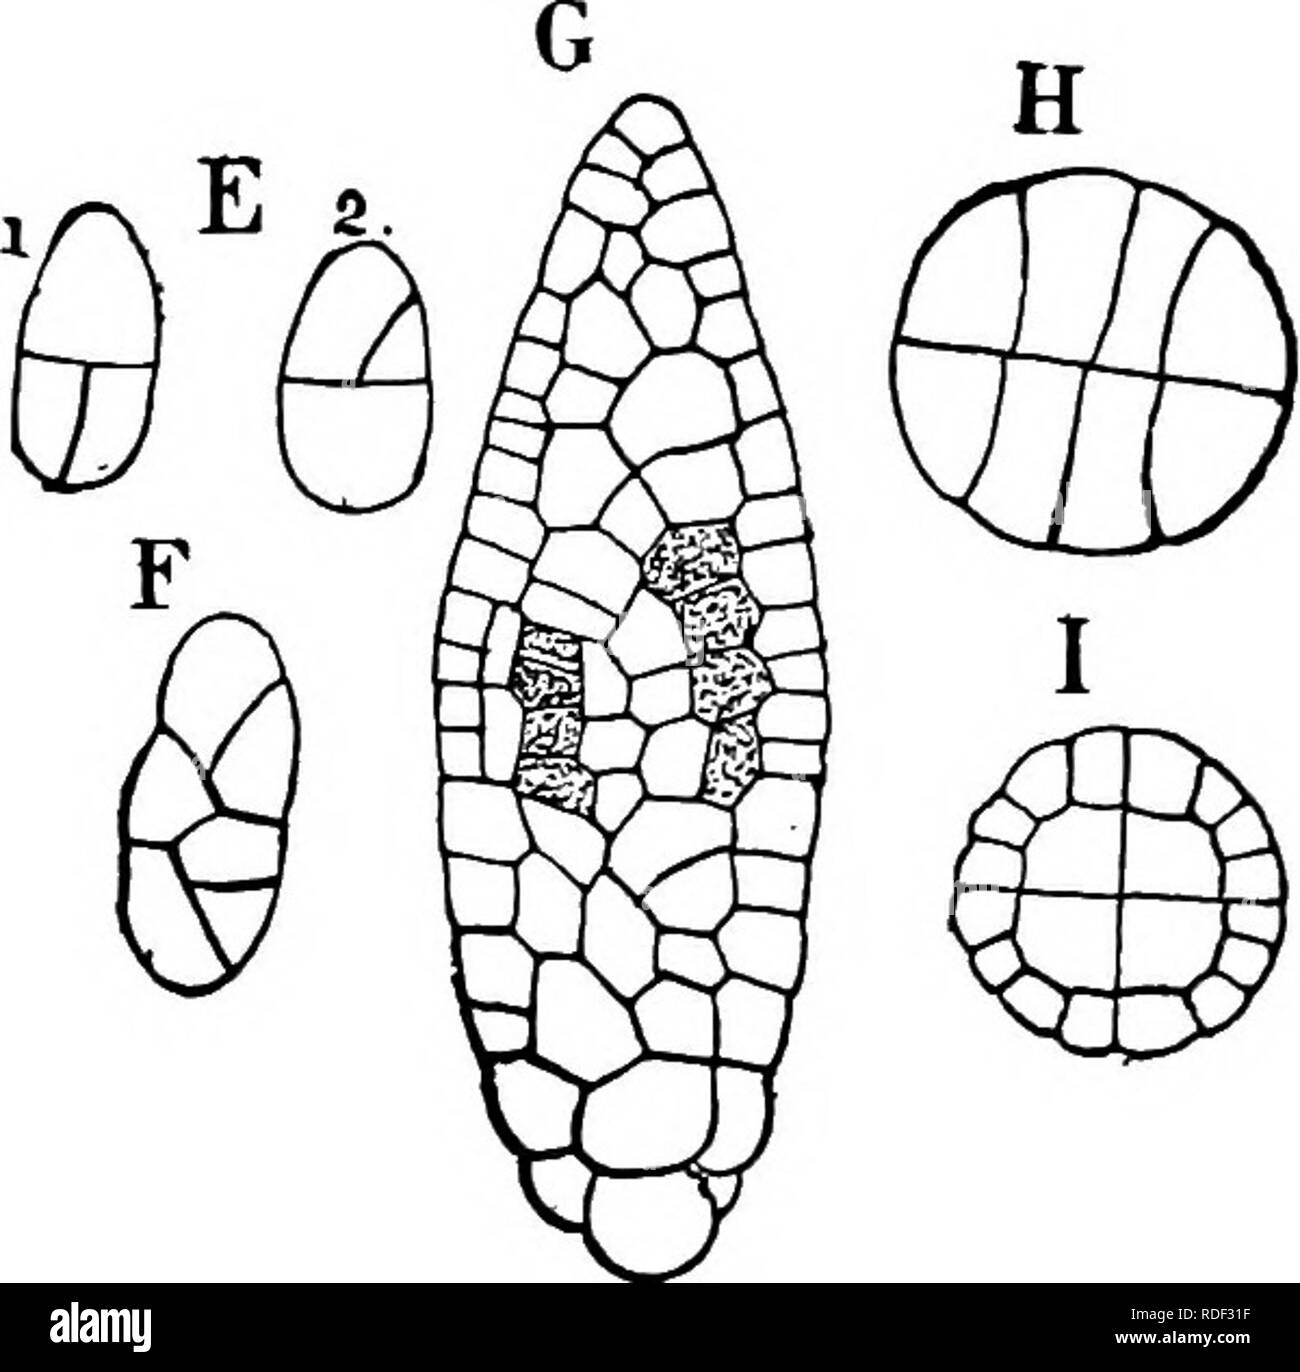 . The structure and development of mosses and ferns (Archegoniatae). Plant morphology; Mosses; Ferns. FiG. 95.—A, B, Germinating spores of A. petrophila, X200; C, protonema with bud (fe); D, young archegonium in optical section; E, i, is, two views of a very young embryo of A, crassinerva, X266; F, somewliat older embryo of A. petrophila; G, older embryo showing the first archesporial cells; H, I, cross-sections of young embryos, X200. A-D, after Kuhn; E-I, after Waldner. rhizoids. The fiat protonema recalls strongly that of Sphag- num, and is probably genetically connected with it. All of the Stock Photo